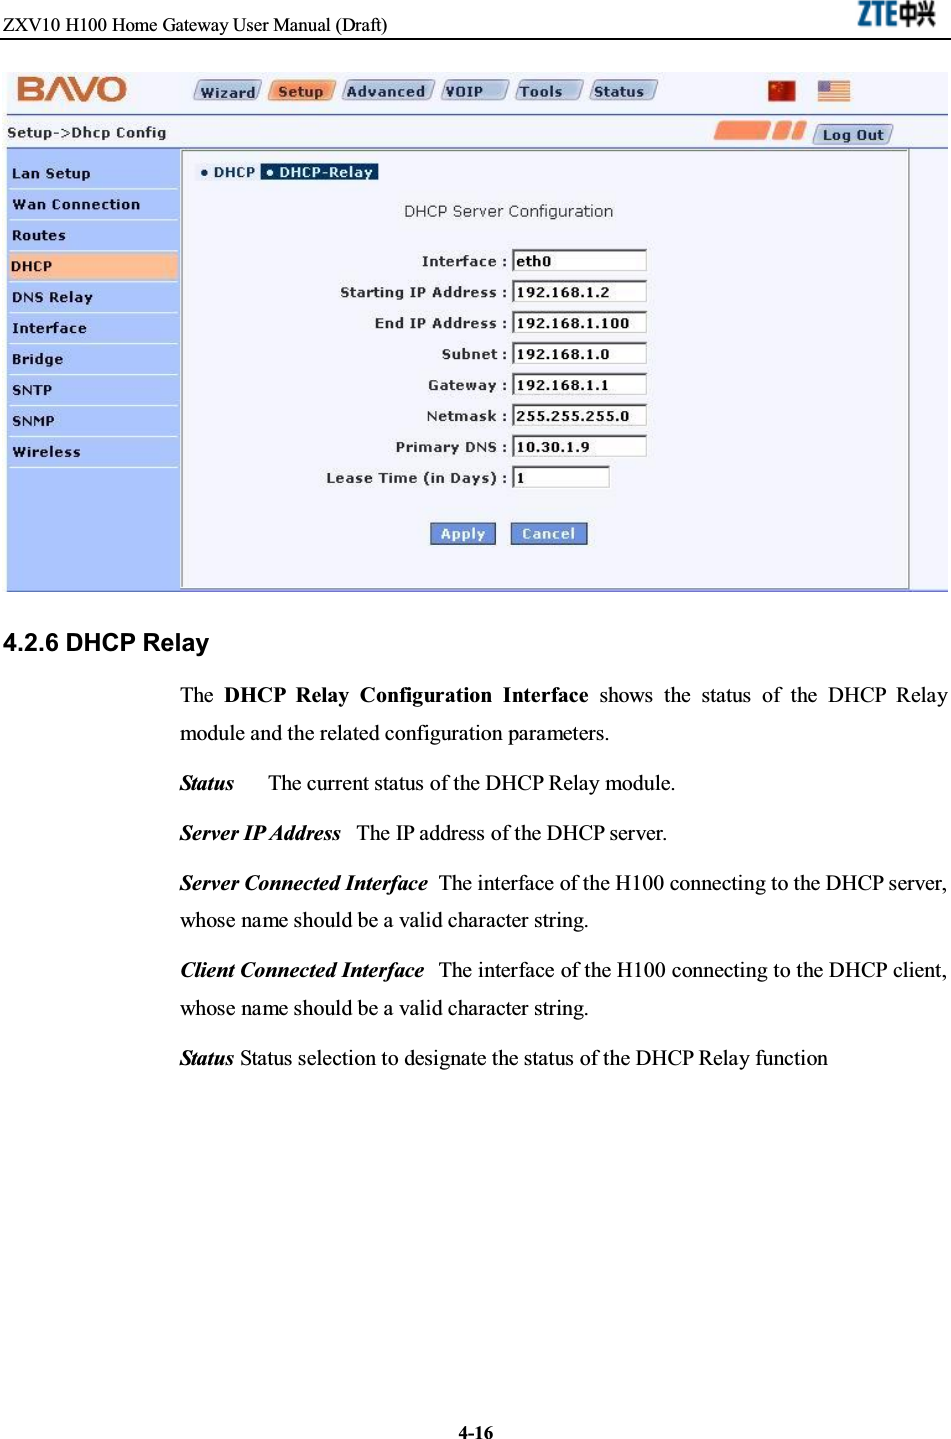 ZXV10 H100 Home Gateway User Manual (Draft)4-164.2.6 DHCP RelayThe DHCP Relay Configuration Interface shows the status of the DHCP Relaymodule and the related configuration parameters.Status The current status of the DHCP Relay module.Server IP Address The IP address of the DHCP server.Server Connected Interface The interface of the H100 connecting to the DHCP server,whose name should be a valid character string.Client Connected Interface The interface of the H100 connecting to the DHCP client,whose name should be a valid character string.Status Status selection to designate the status of the DHCP Relay function